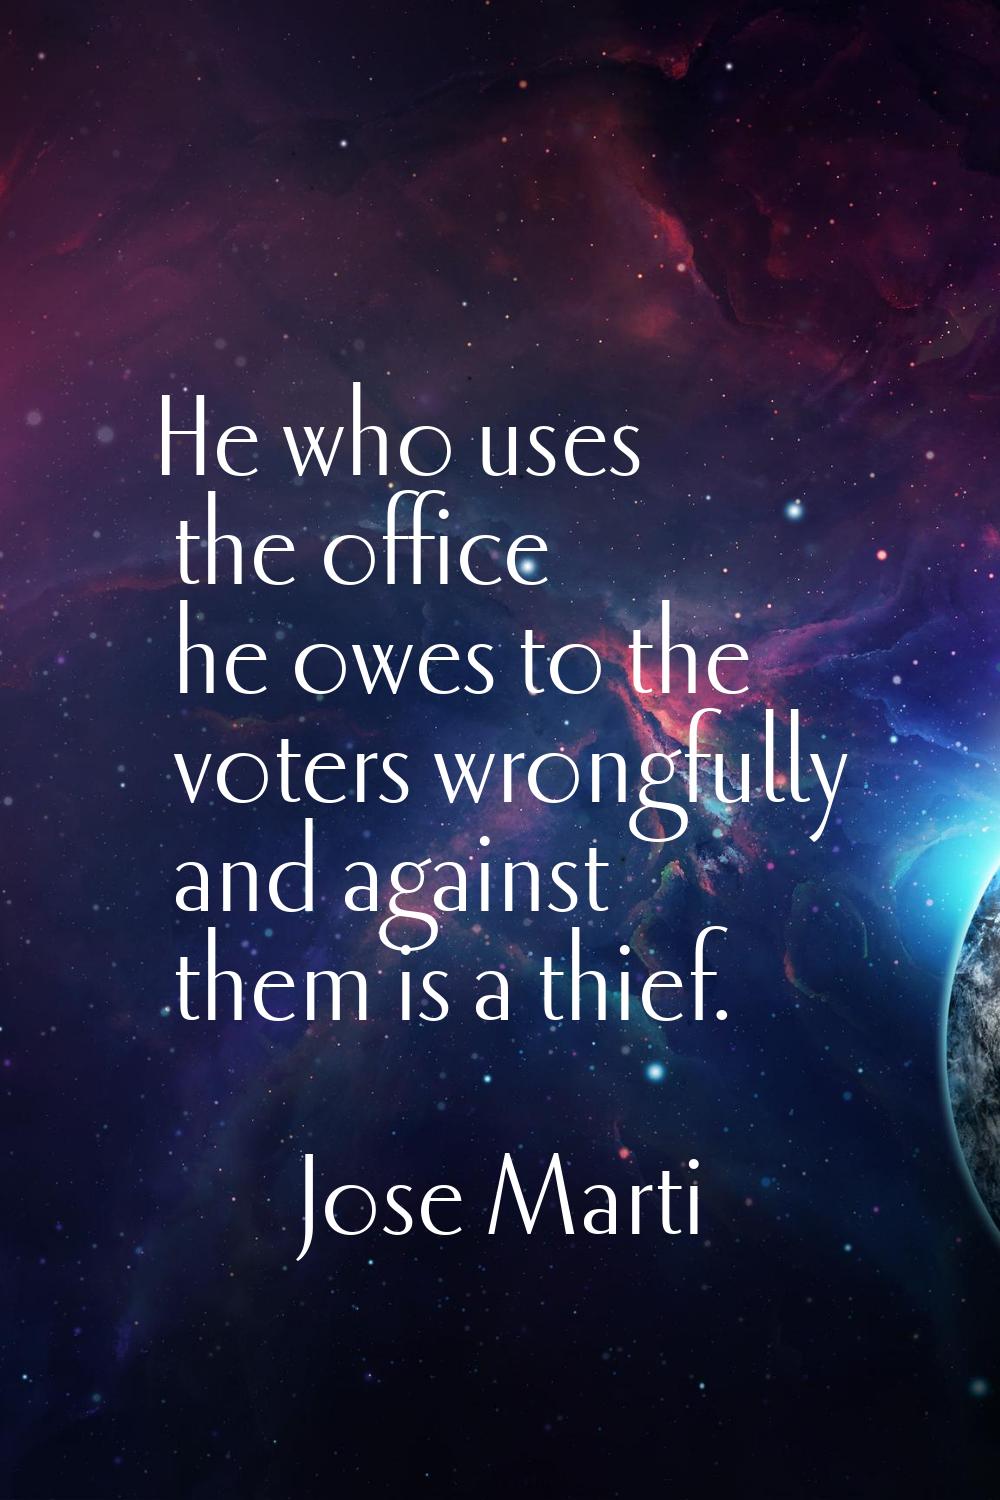 He who uses the office he owes to the voters wrongfully and against them is a thief.